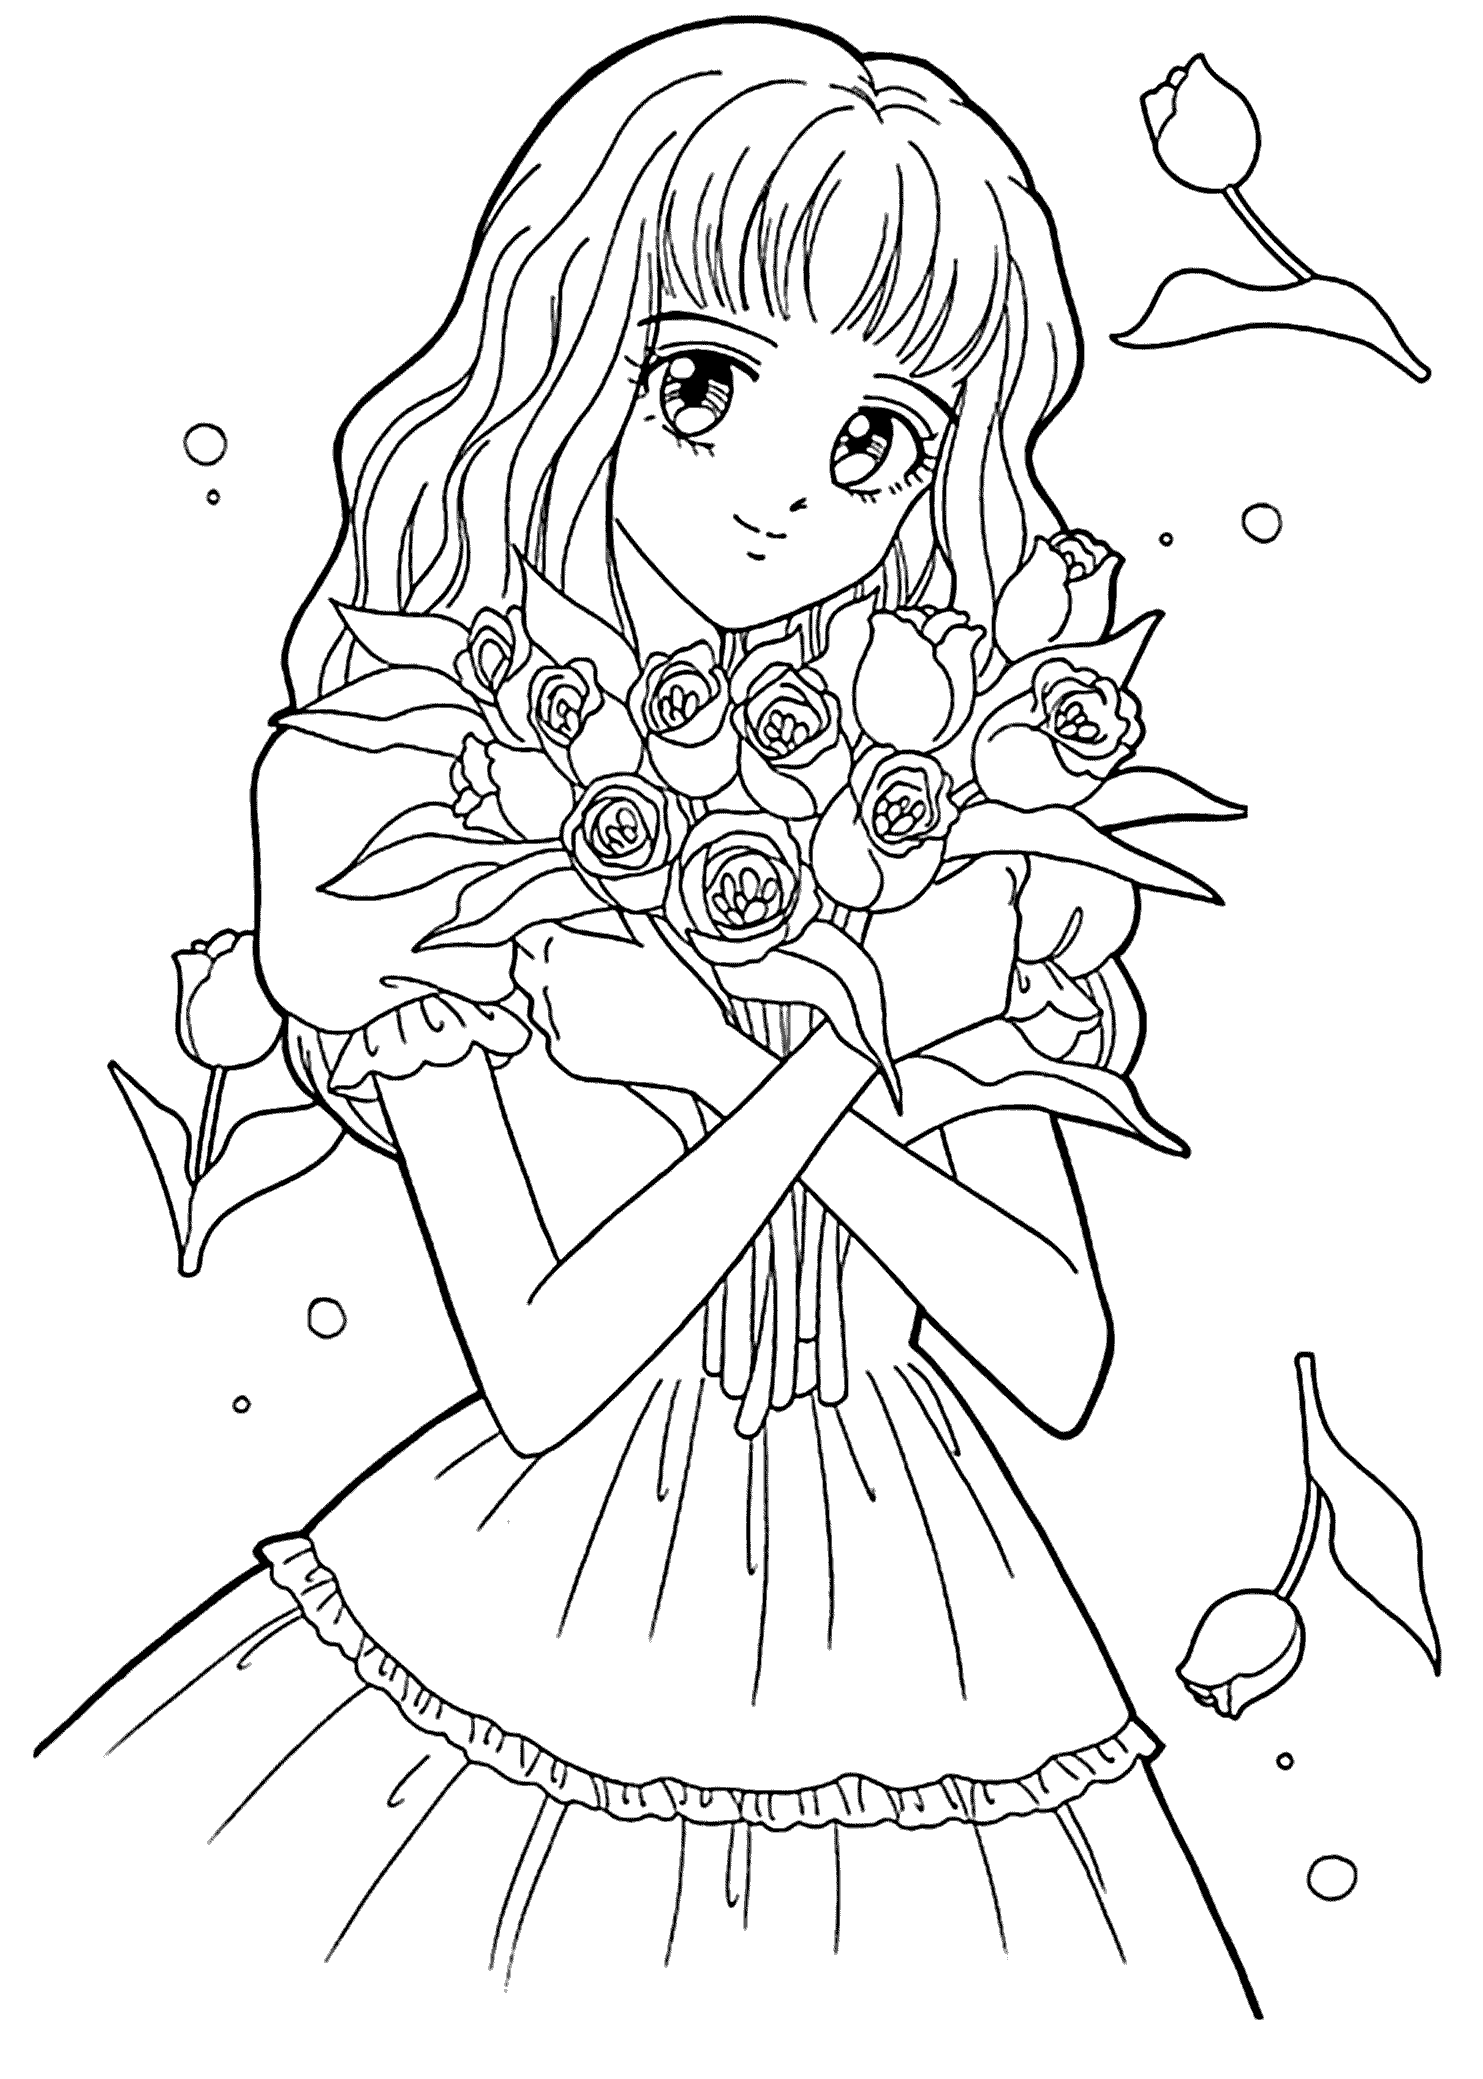 Manga coloring pages to download and print for free